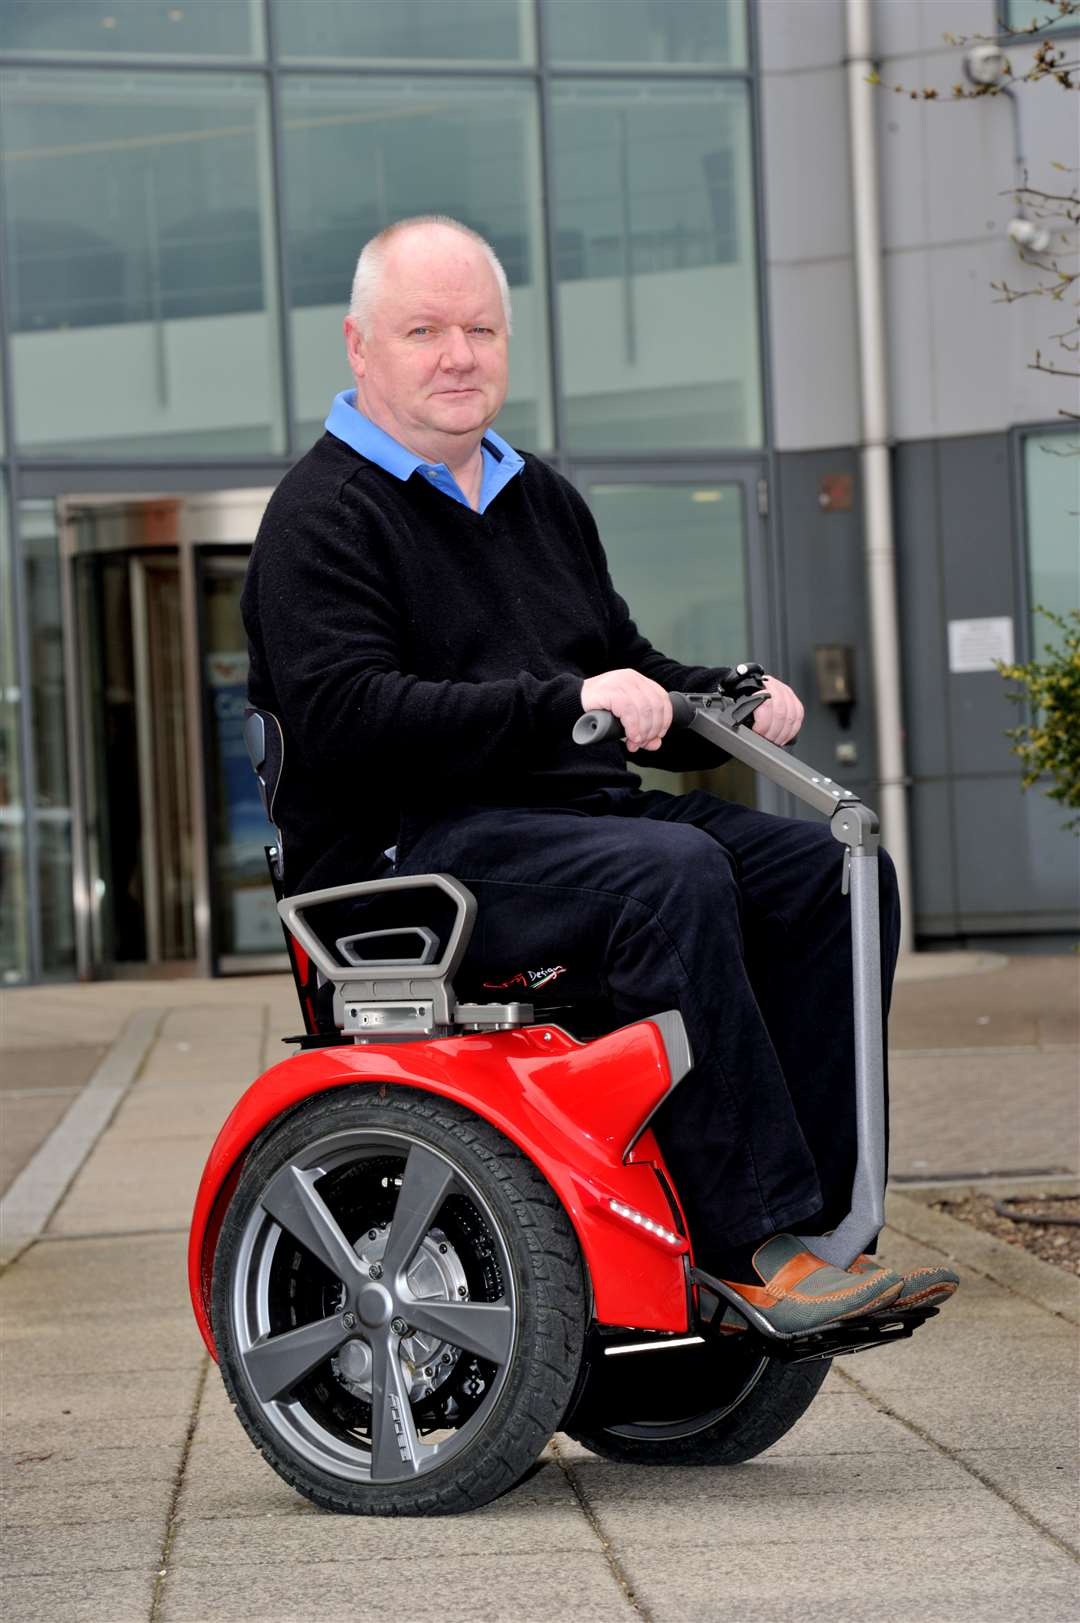 Craig sitting in the new-style mobility wheelchair